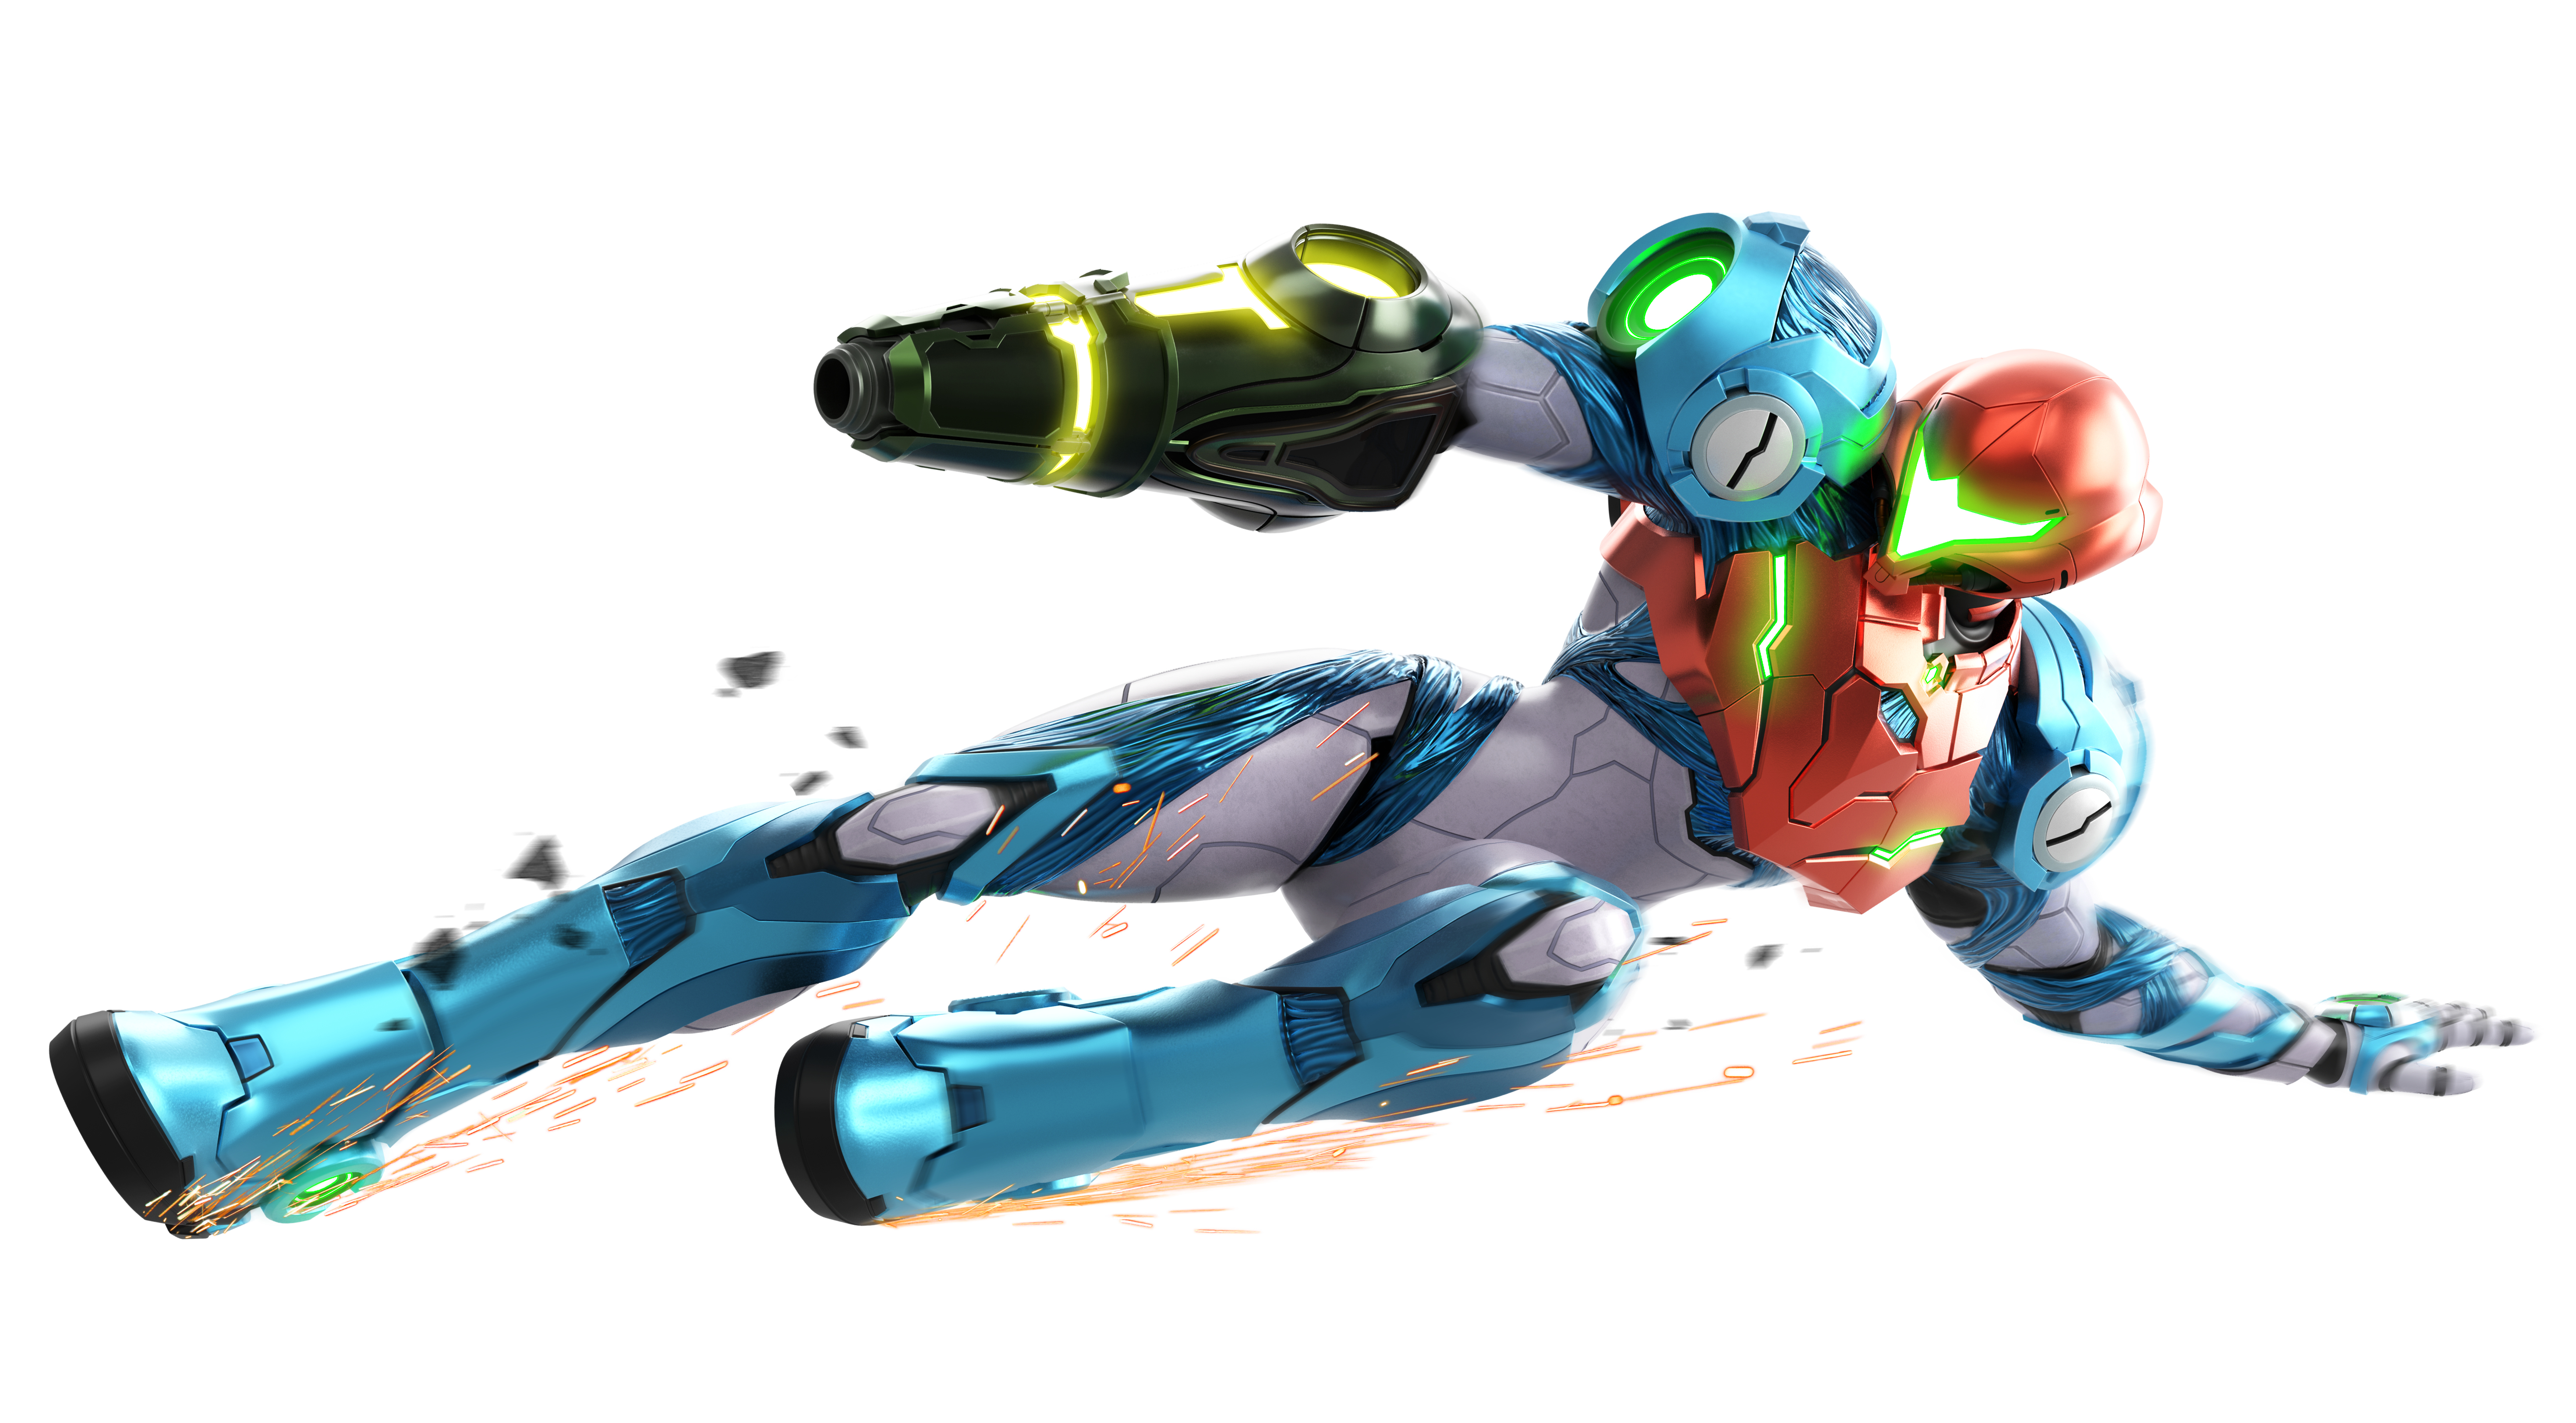 Video Game Metroid Dread HD Wallpaper Background Image.